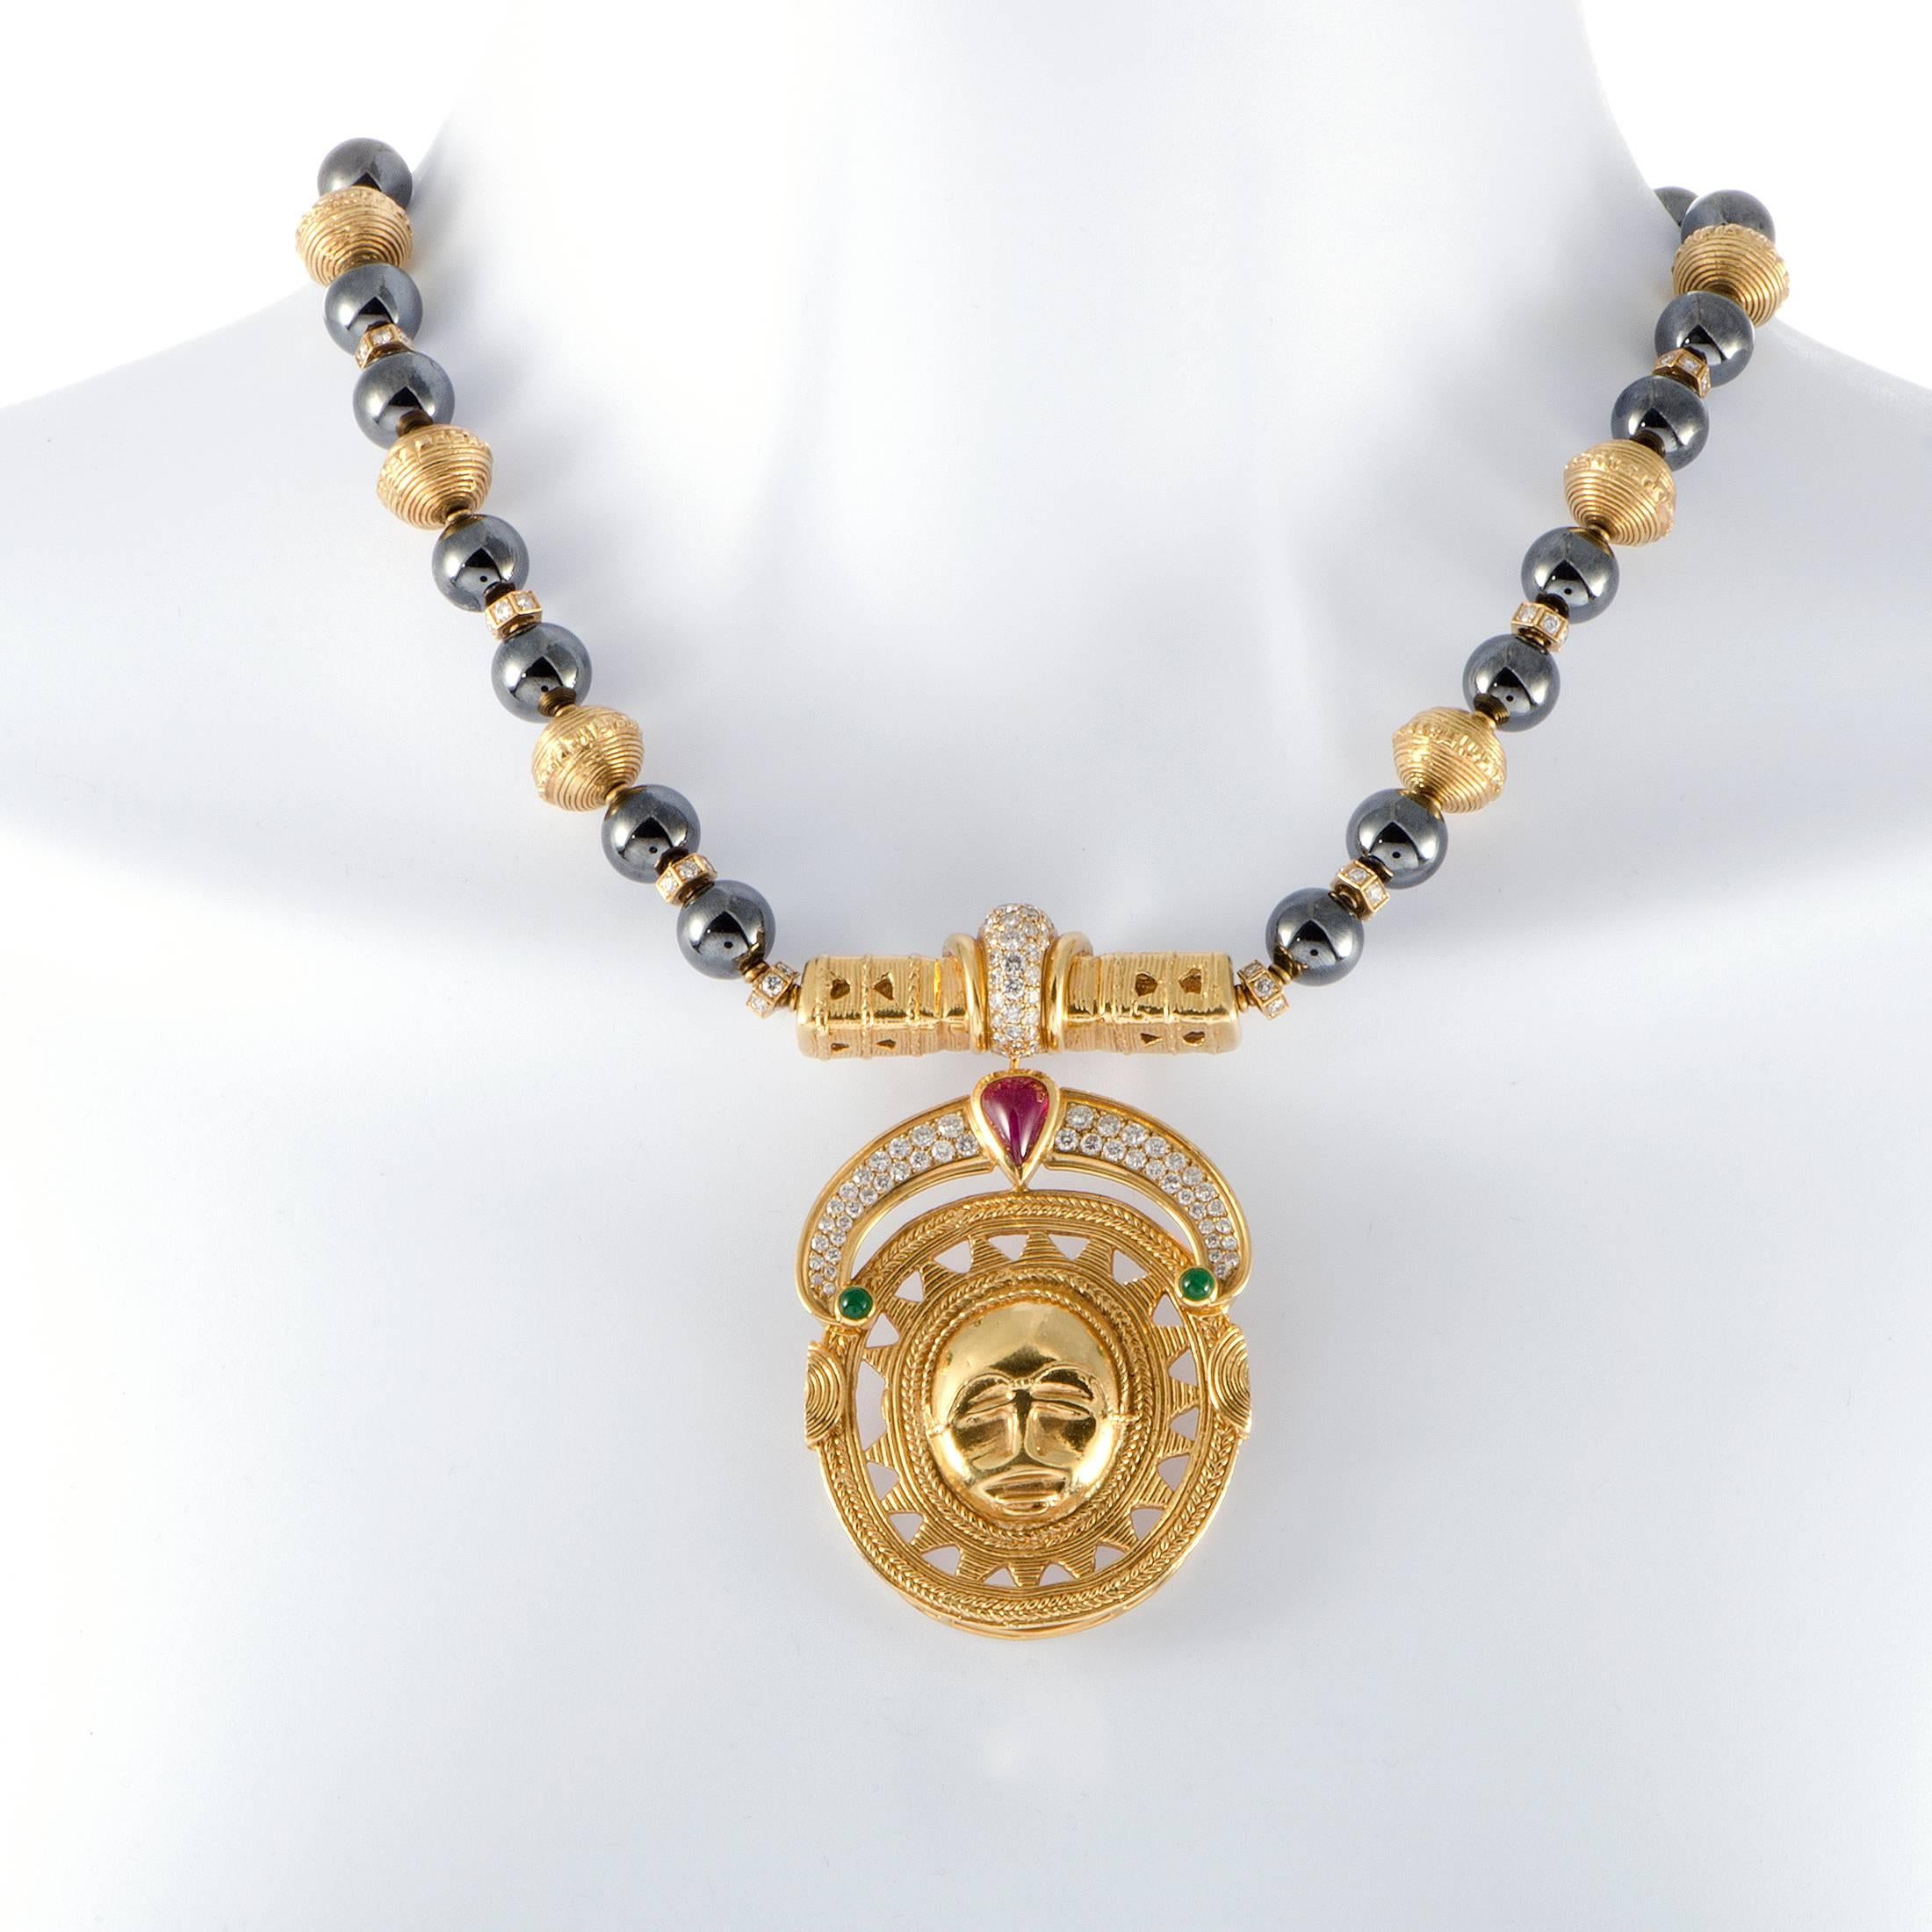 Comprised of 18K yellow gold and hematite beads and featuring an incredibly eye-catching pendant, this necklace boasts a remarkably fashionable appeal. Designed by Boucheron, it also features emeralds, a ruby and 1.75 carats of diamonds.
Pendant